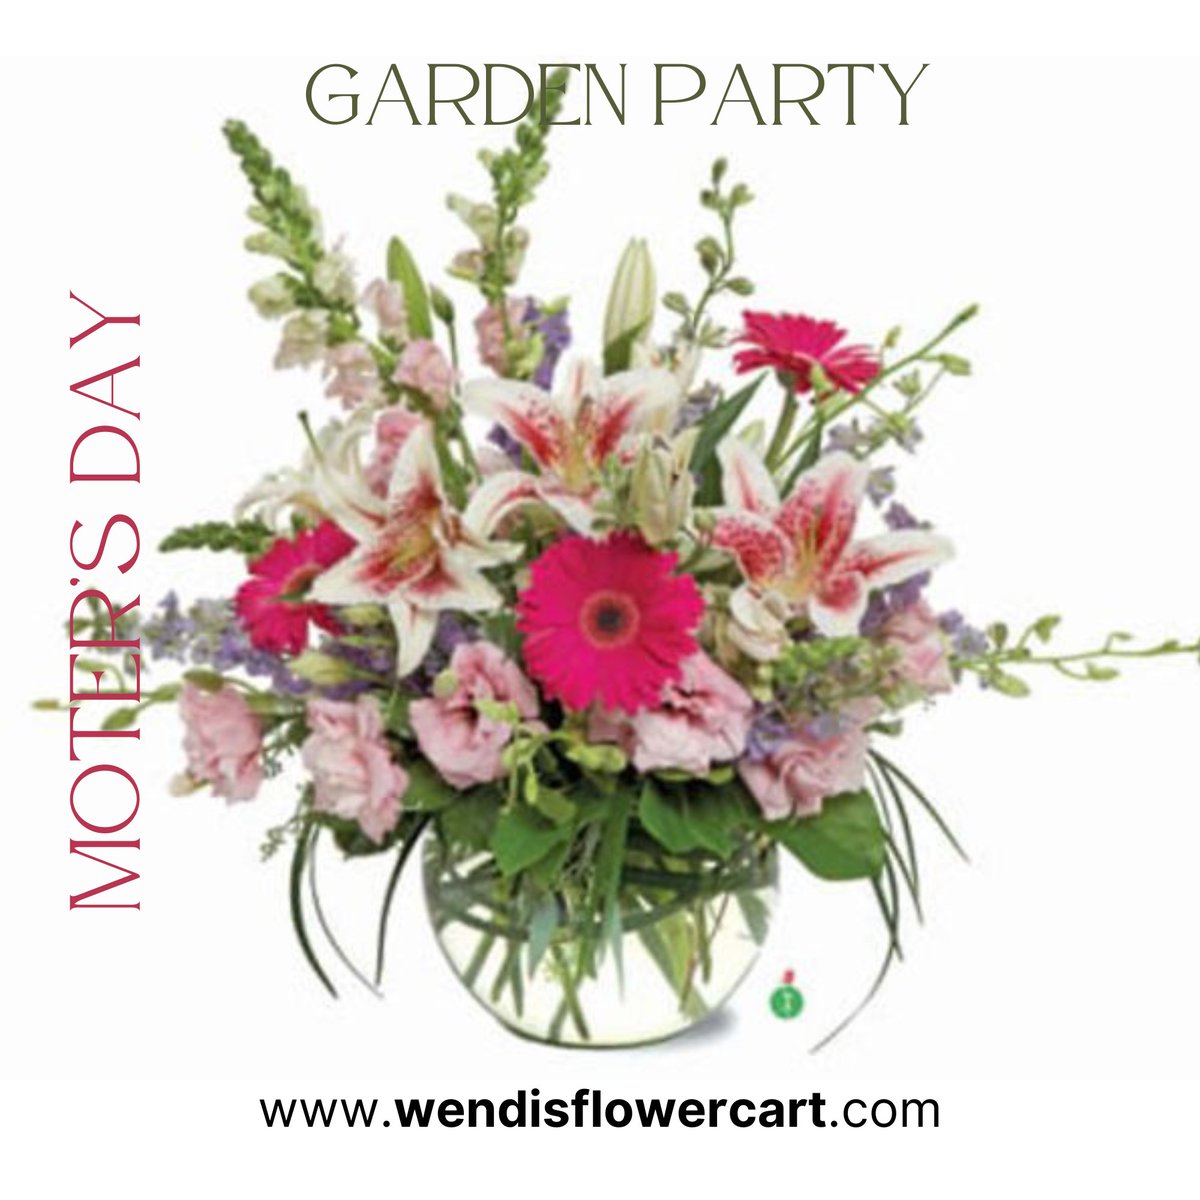 Mother's Day is this Sunday, May 12th.
Show her your love and appreciation with a custom floral bouquet from Wendi's.
Order early to ensure delivery.

Wendi's Flower Cart ~ 337.474.5236 ~ wendisflowercart.com

#MothersDaySpecials #WendisFlowerCart #FloristLakeCharlesLa